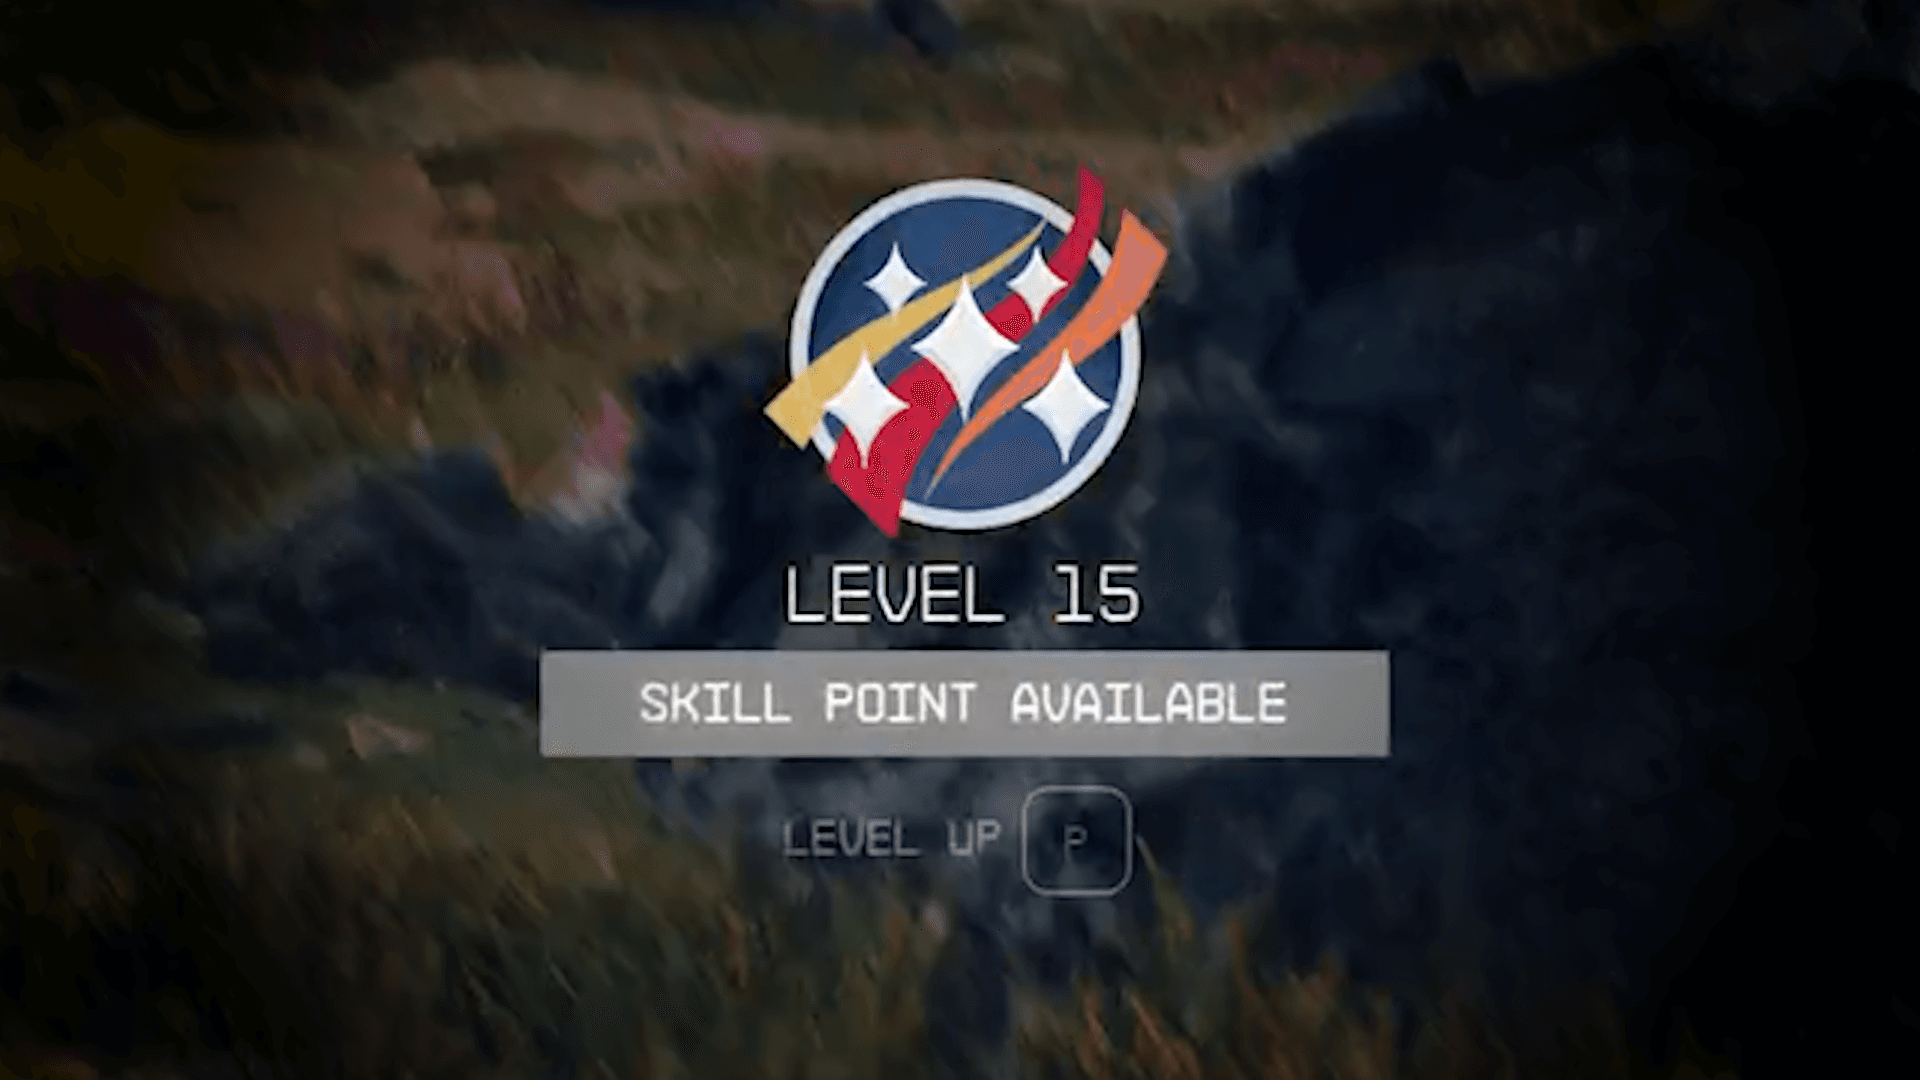 Leveling Up and gaining skill point